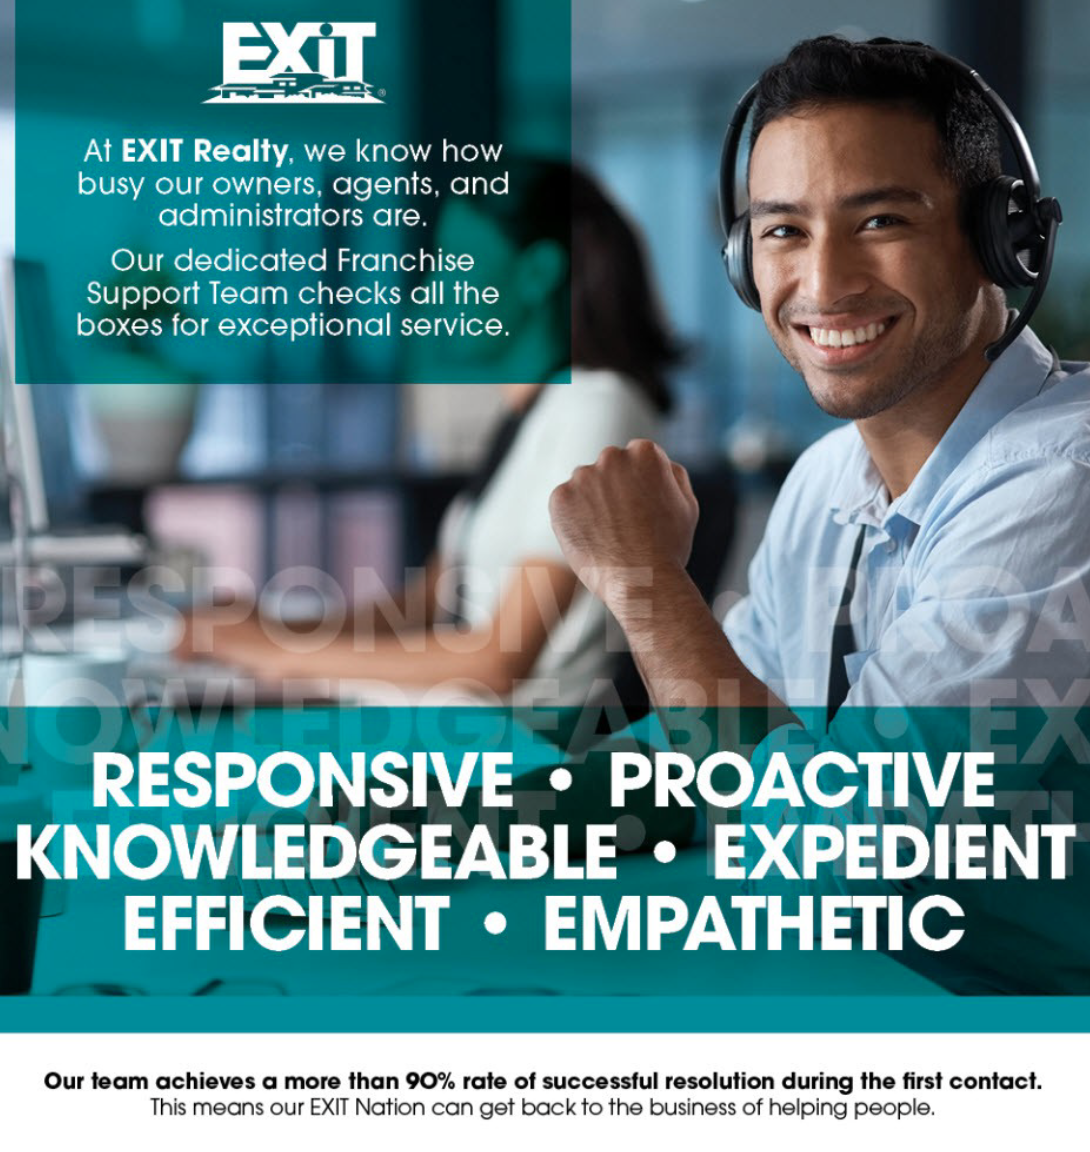 EXIT Realty Corp. International Franchise Support’s First Contact Resolution (FCR) rate is over 90%